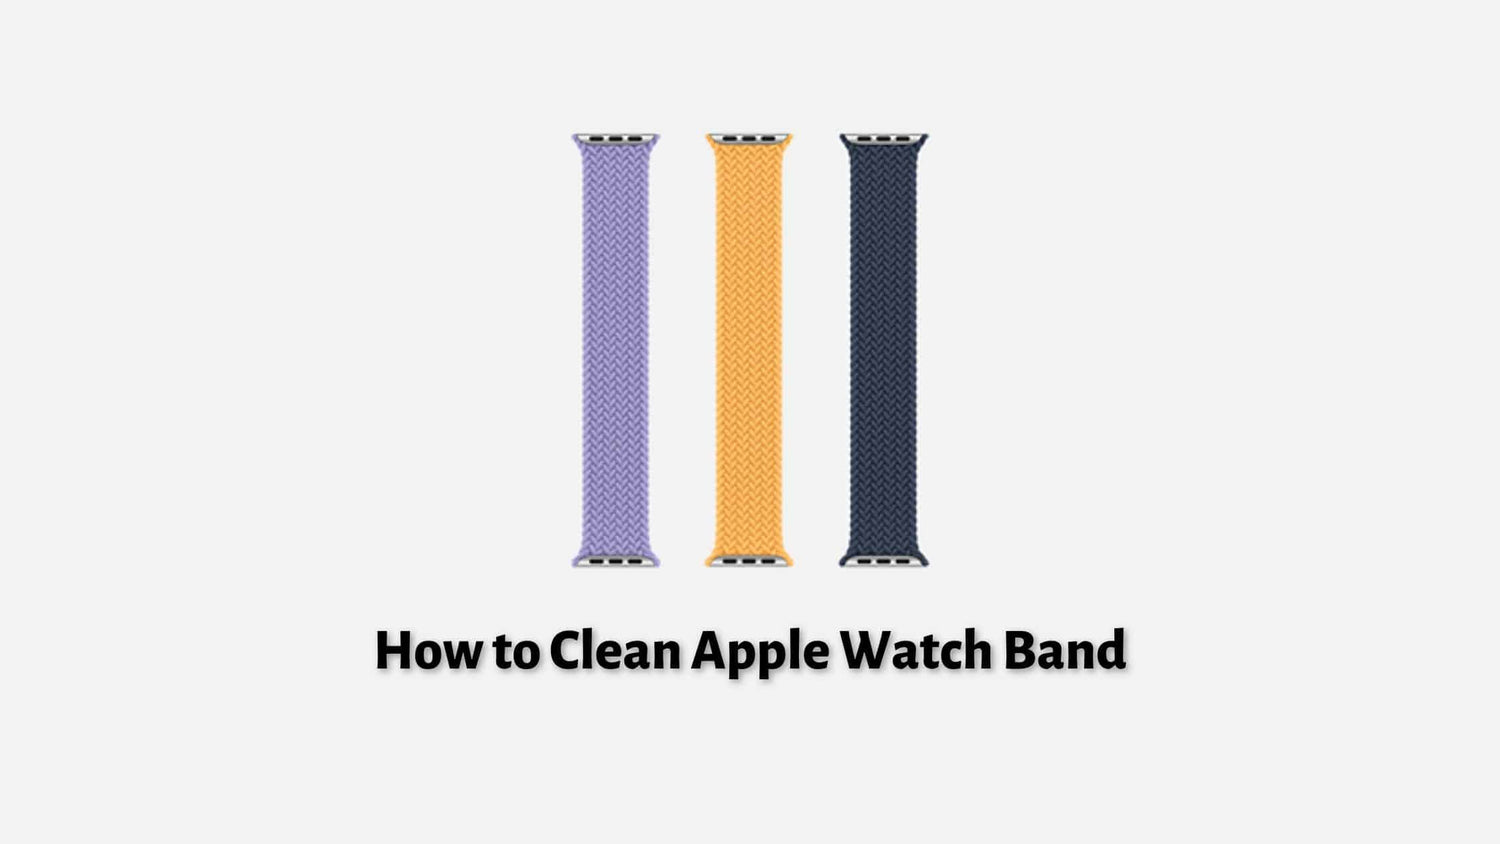 How to Clean Apple Watch Band So It Looks New?